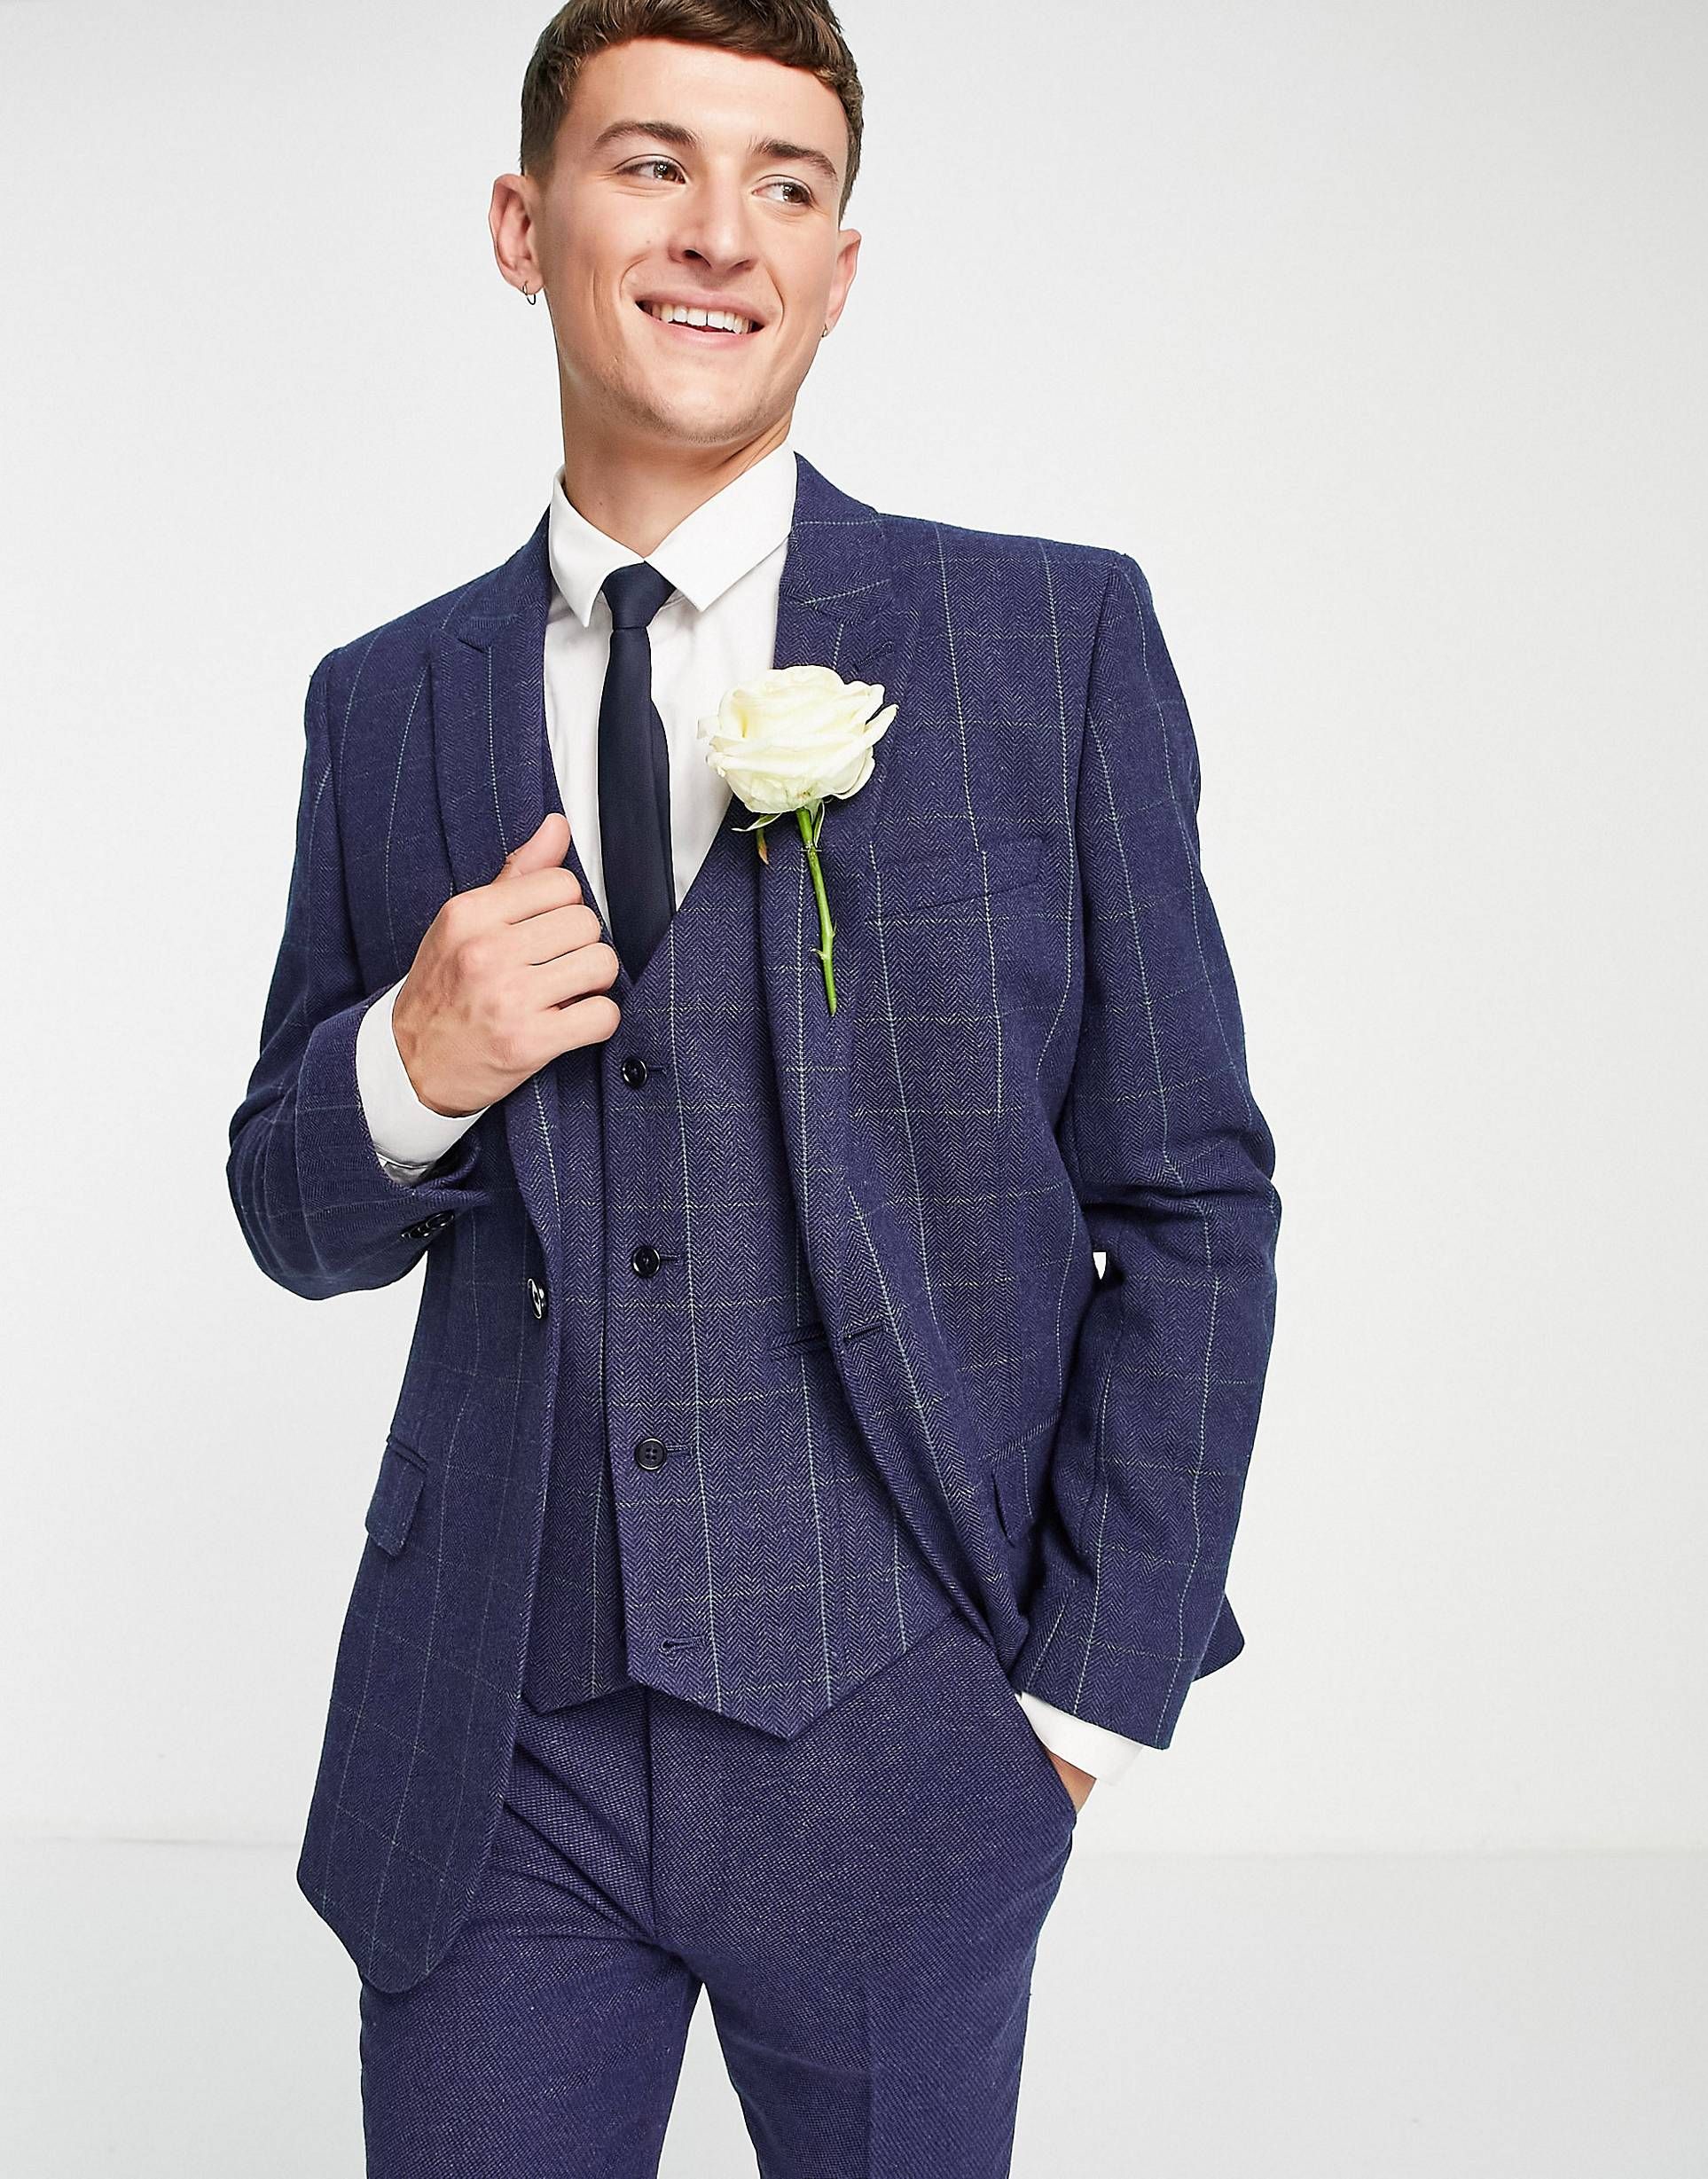 Homecoming Outfit Ideas For Guys - Get Latest Outfits For 2023 Update